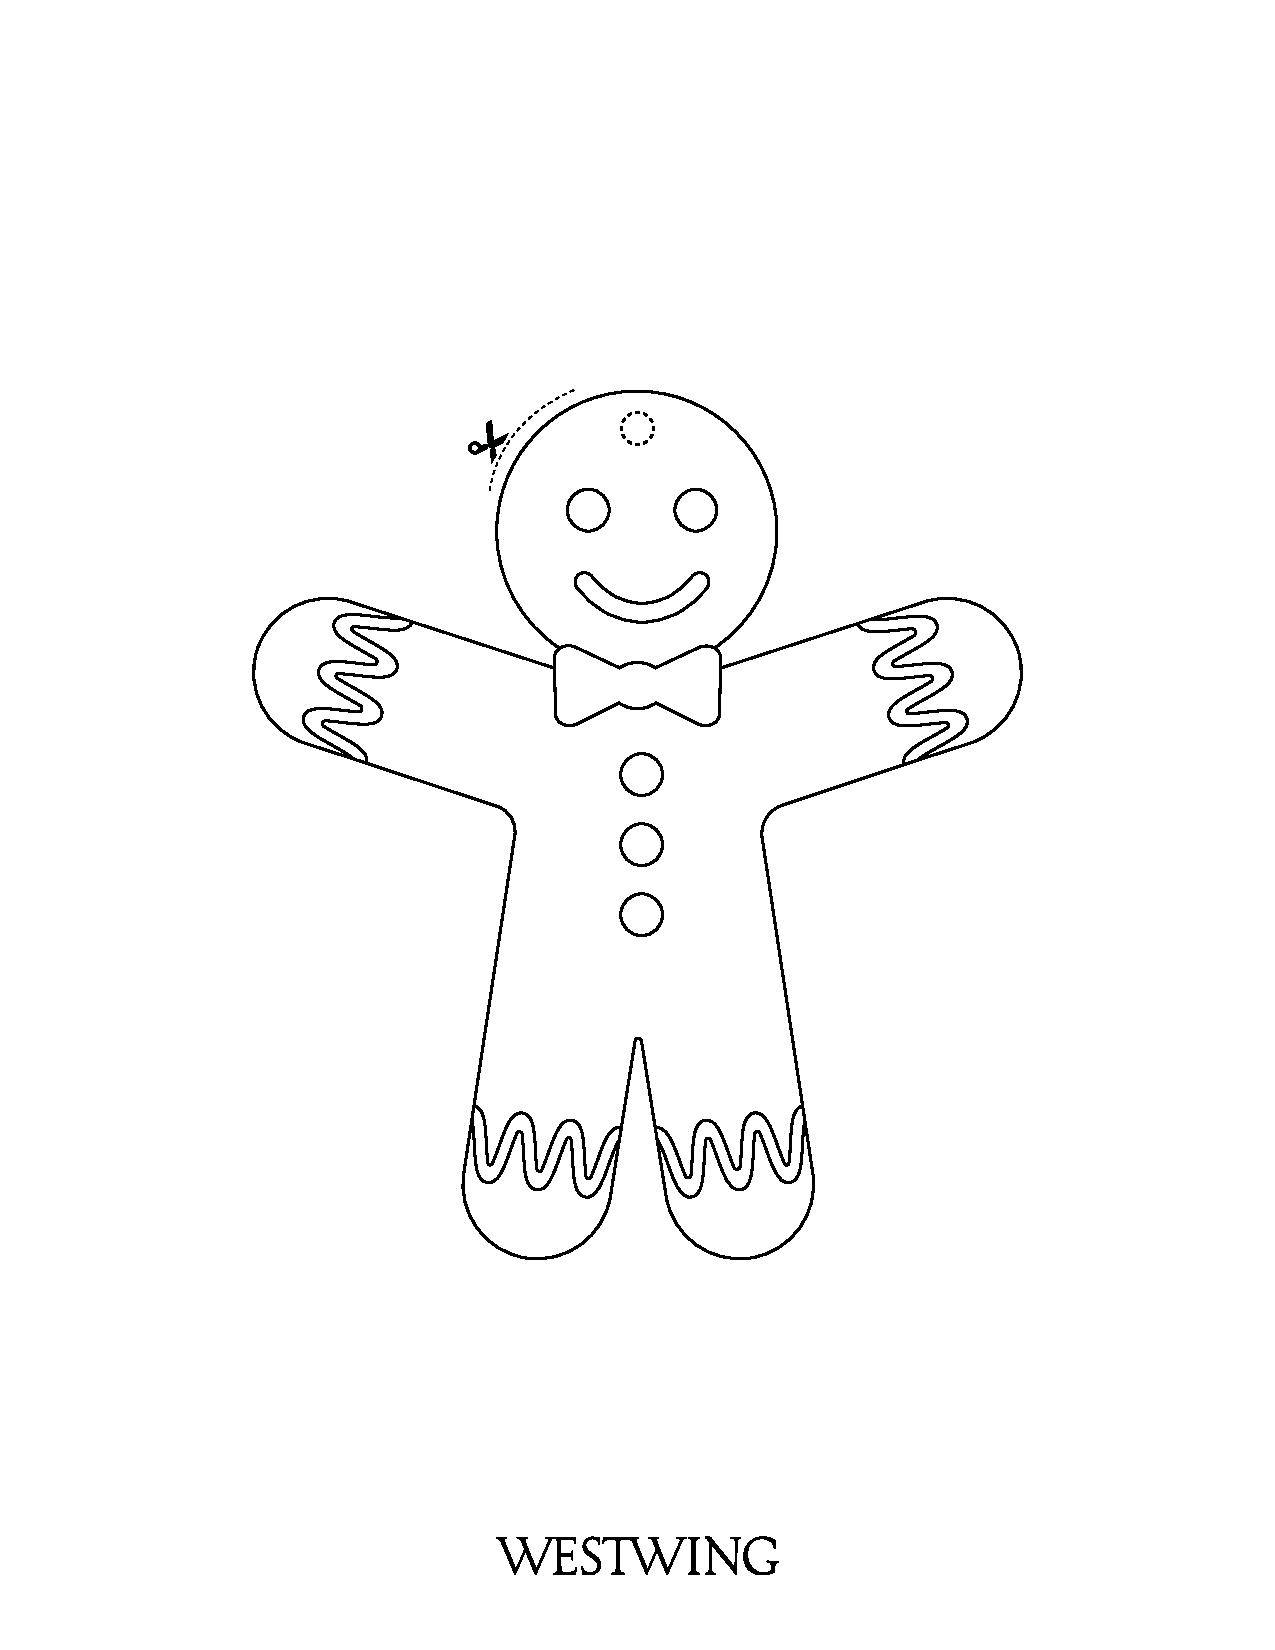 Gingerbread man to cut out and color, for children